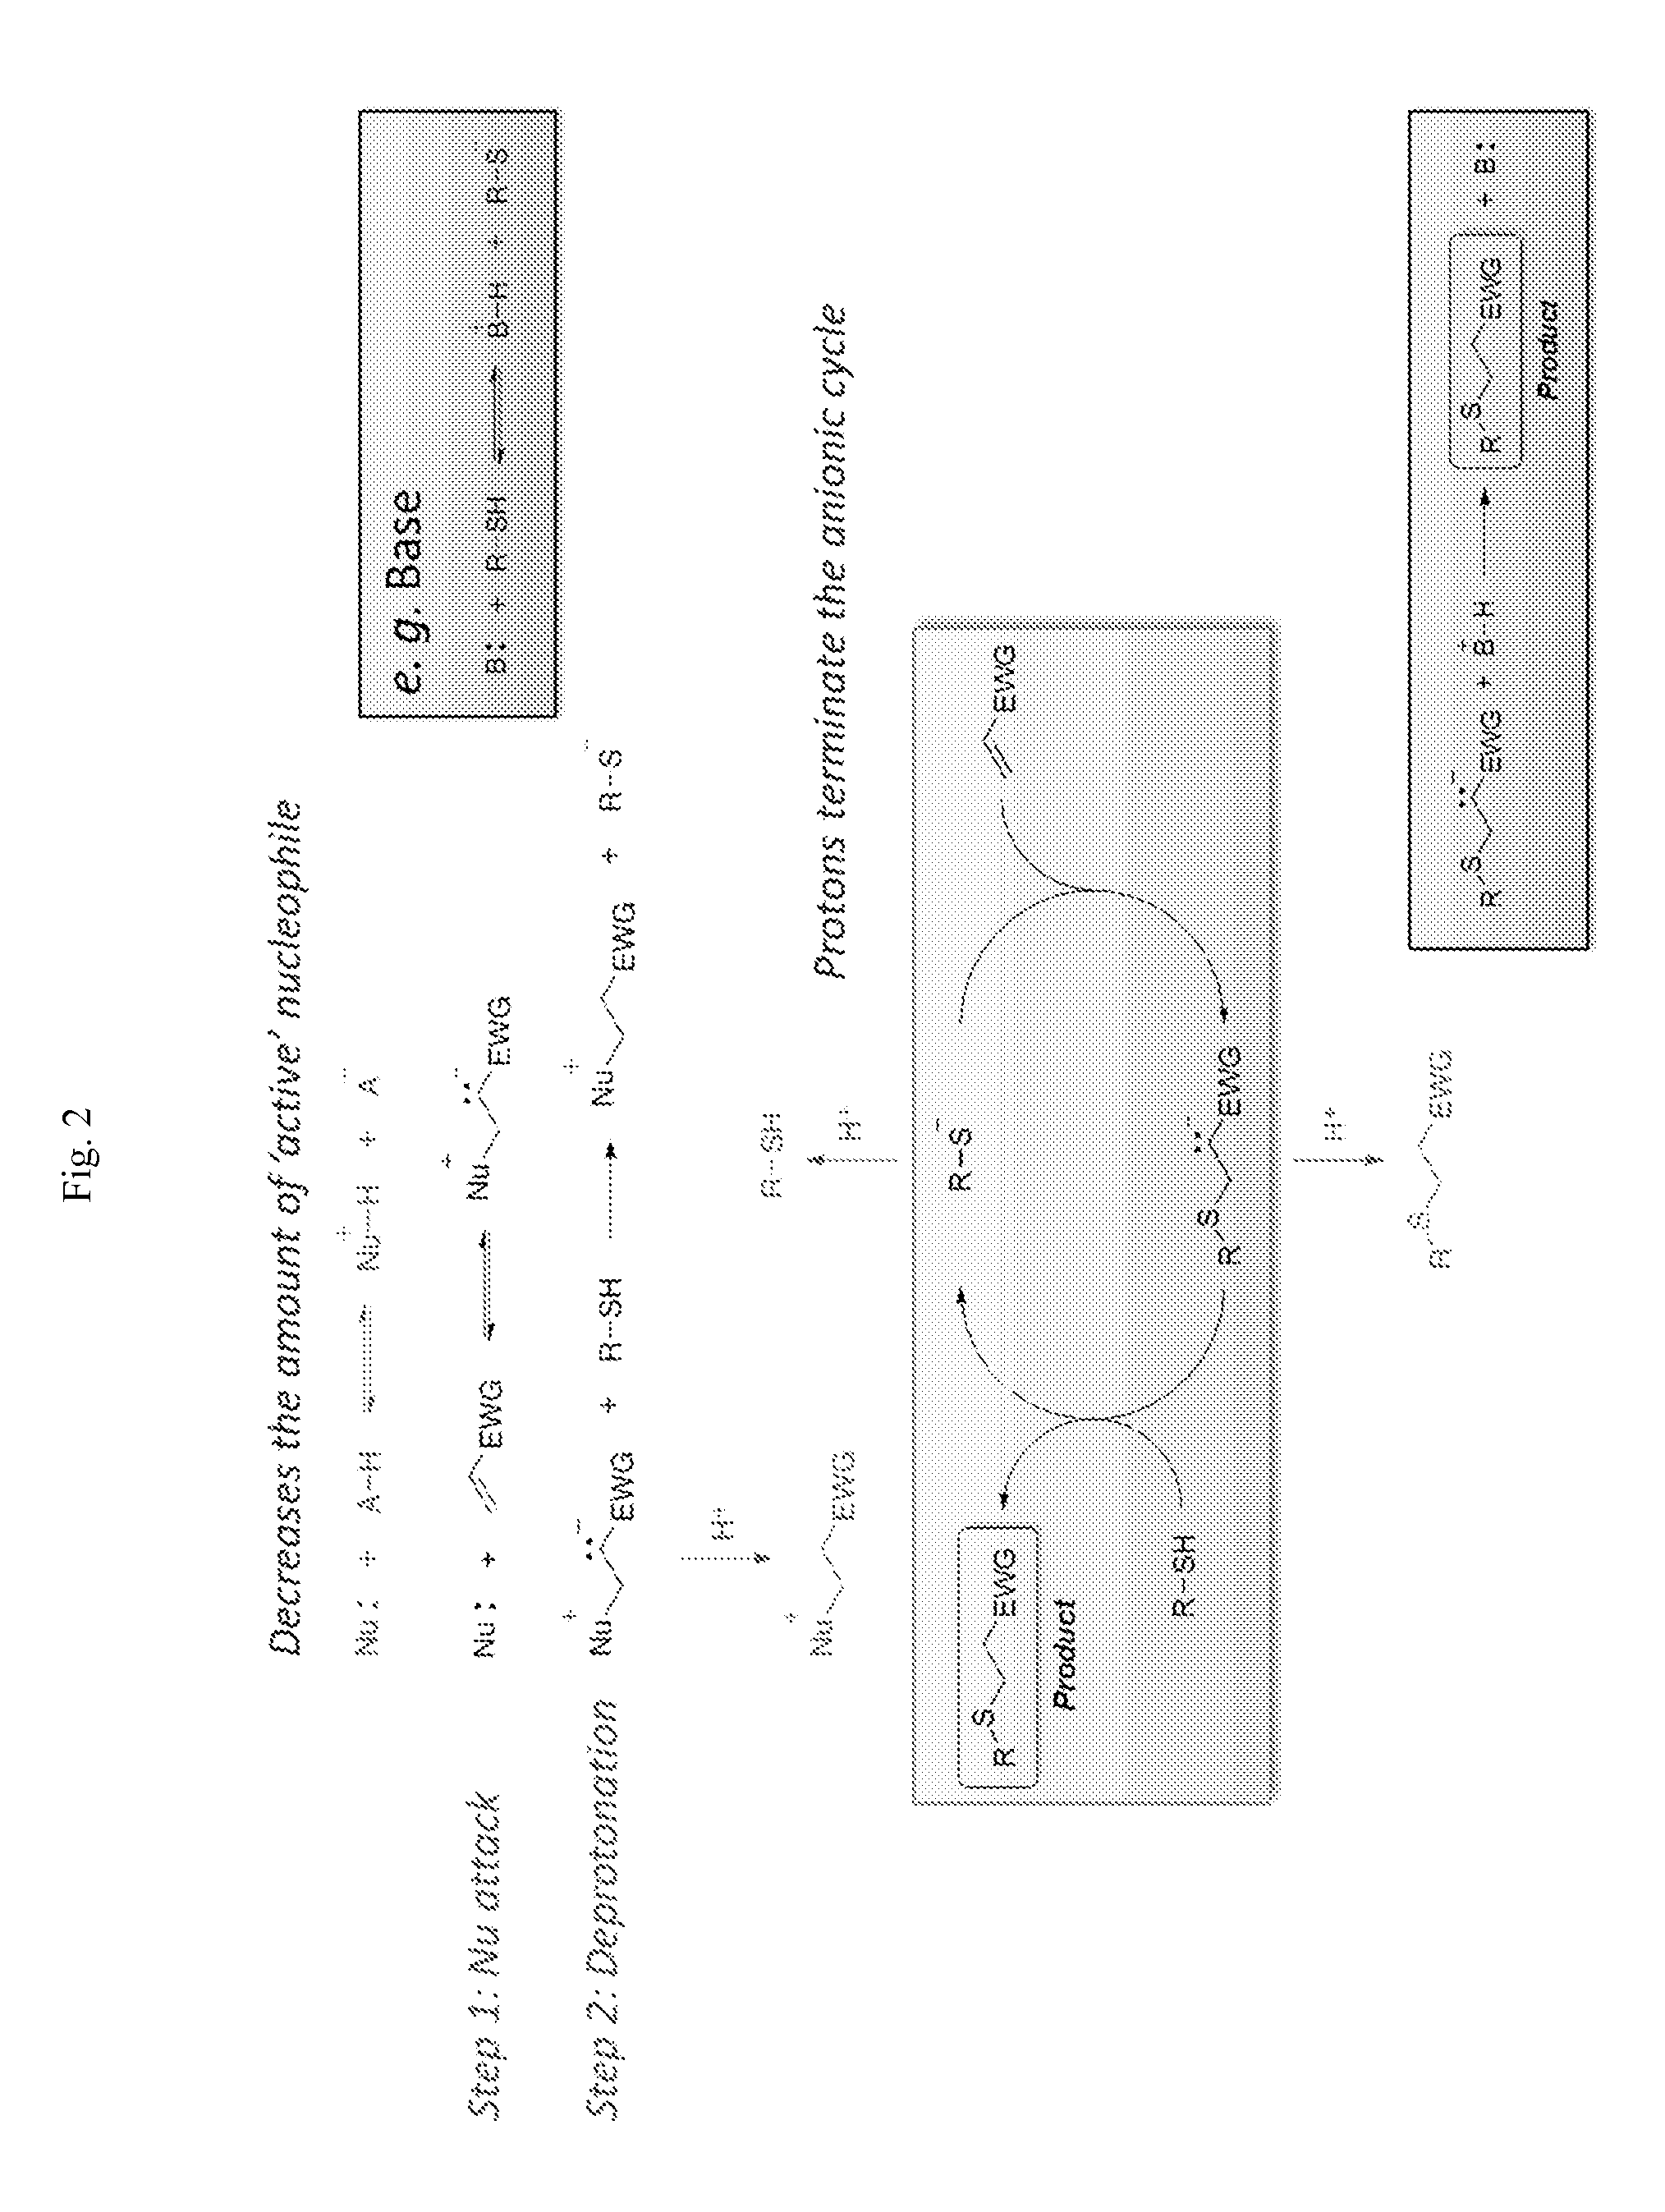 Novel thiol-containing dual cure polymers and methods using same